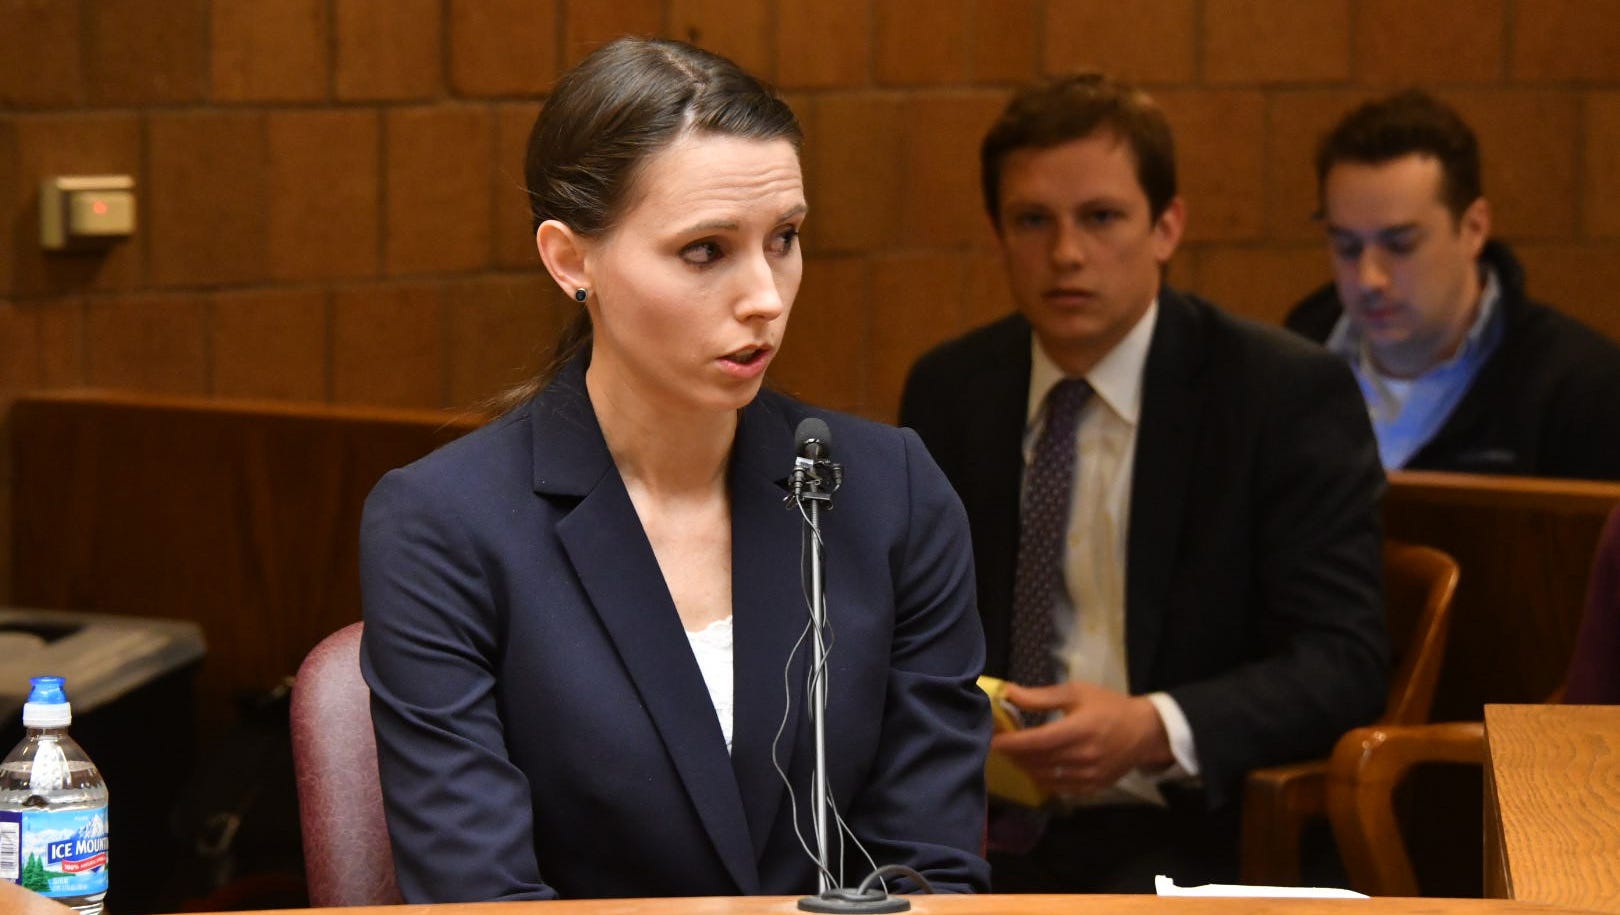 2016: Former gymnast Rachael Denhollander becomes the first to publicly accuse Nassar of molesting her. She files a police report and makes a Title IX complaint.